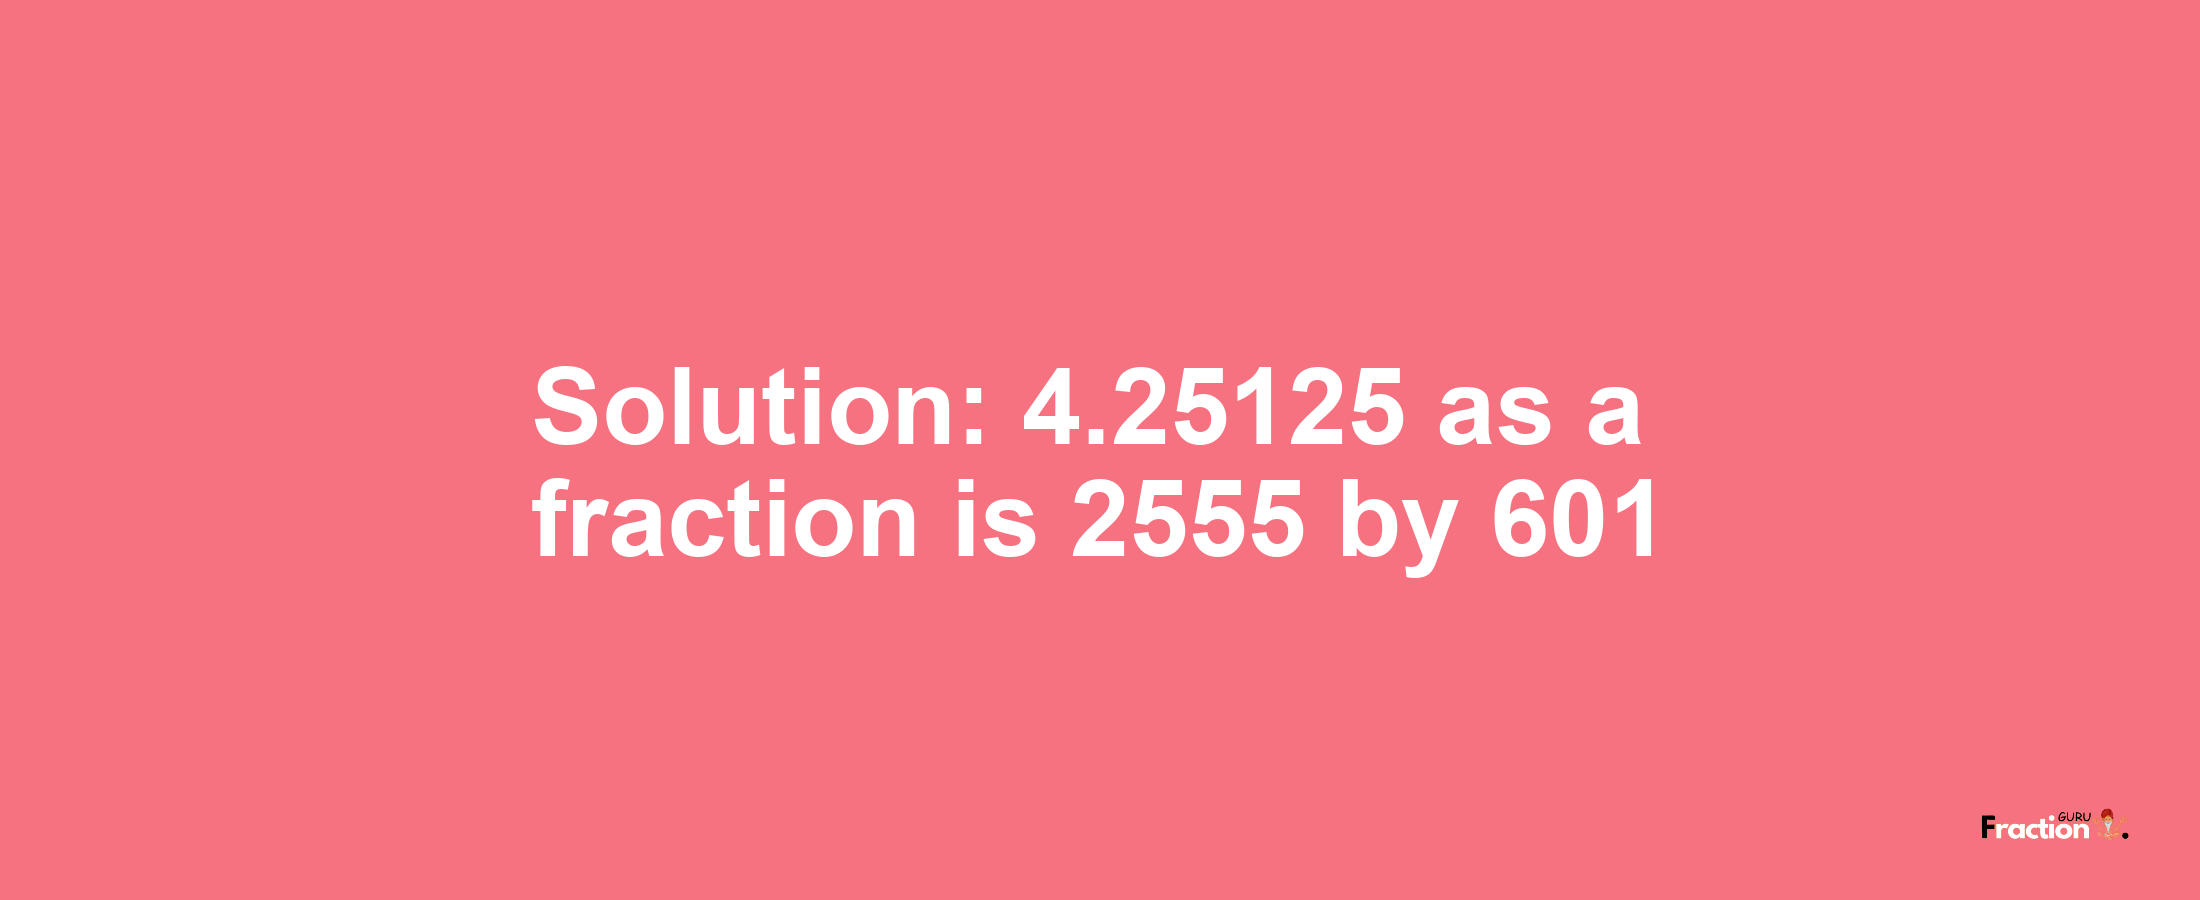 Solution:4.25125 as a fraction is 2555/601